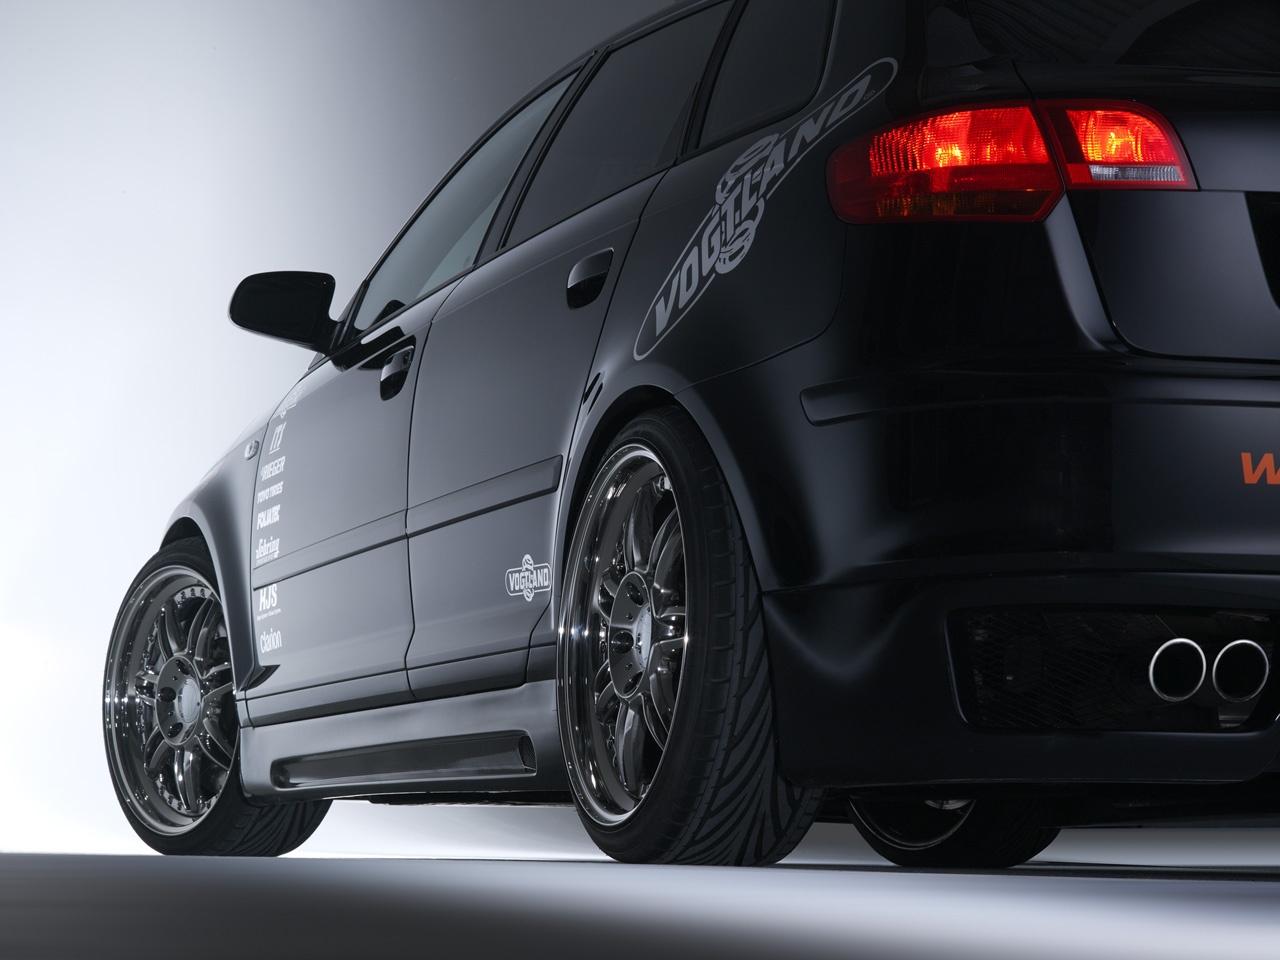 Audi image Audi A3 HD wallpaper and background photo